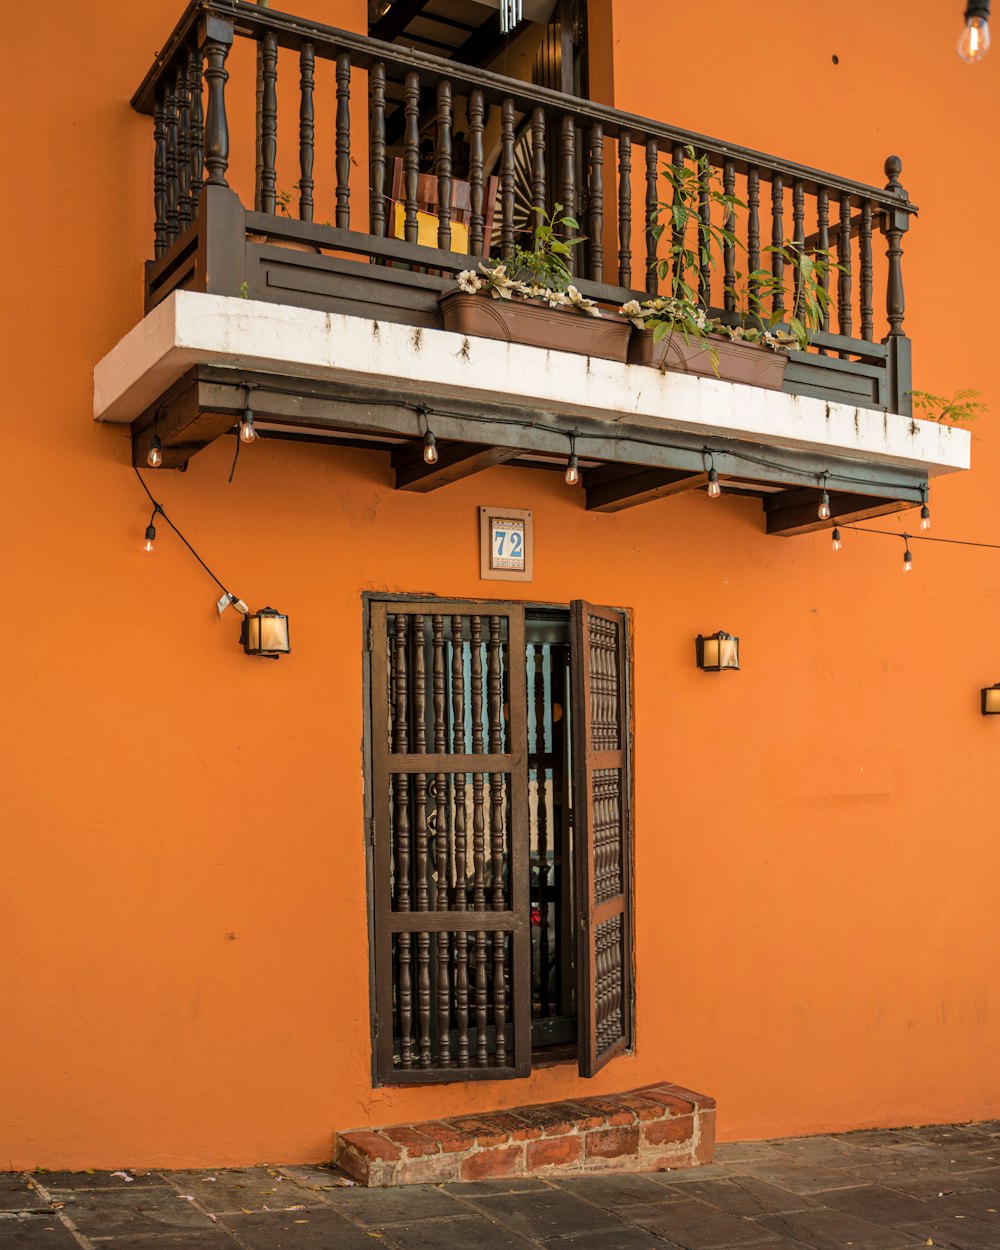 an orange building with a balcony and a window